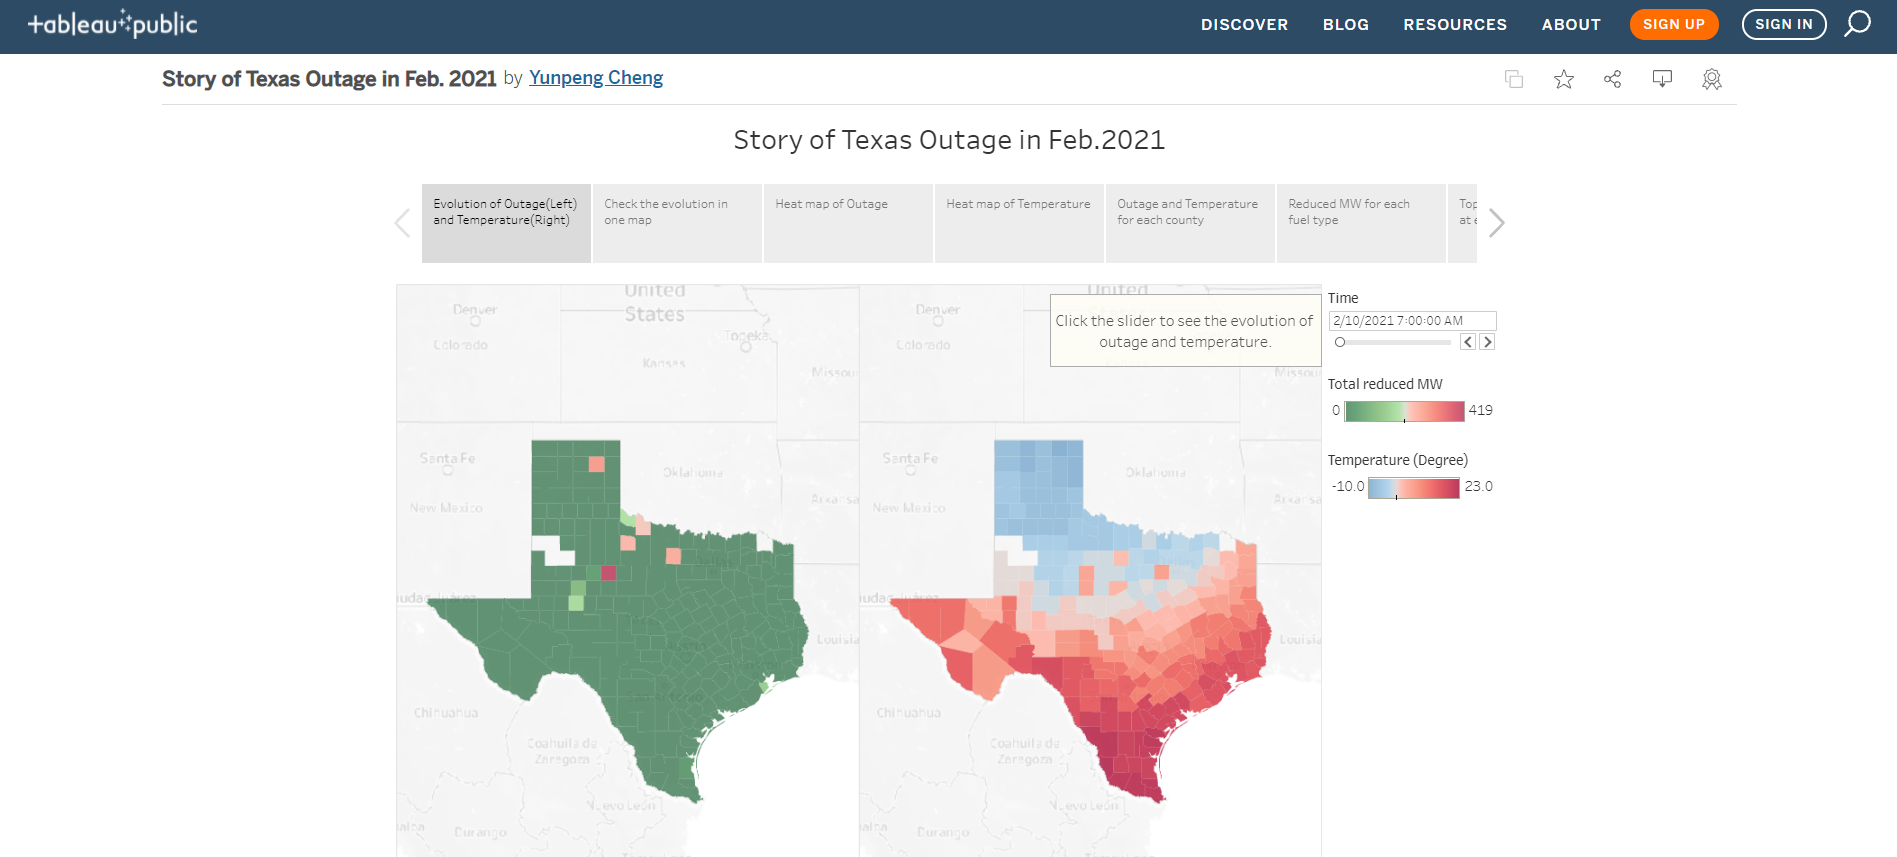 Story of Texas Outage in Feb 2021